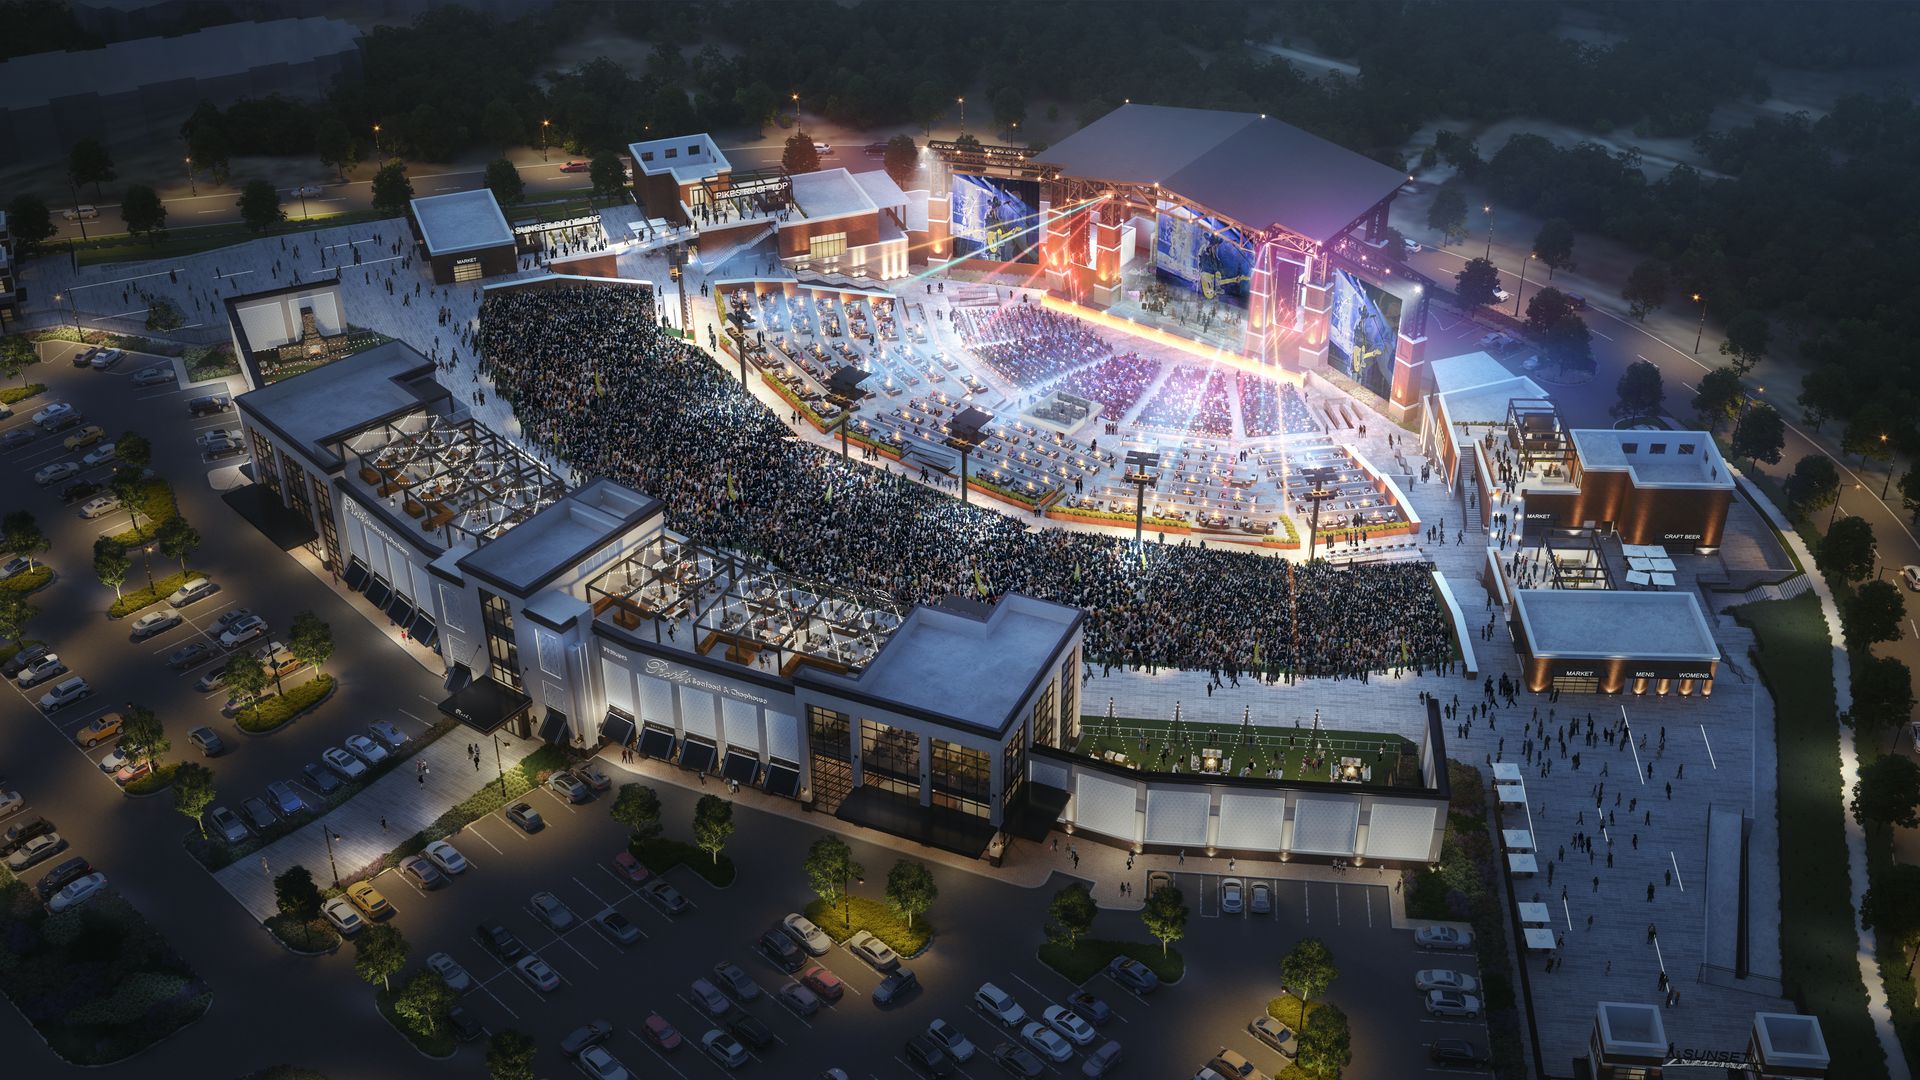 A rendering of the Sunset Amphitheater under construction in Colorado Springs. Image courtesy of Shorefire Media